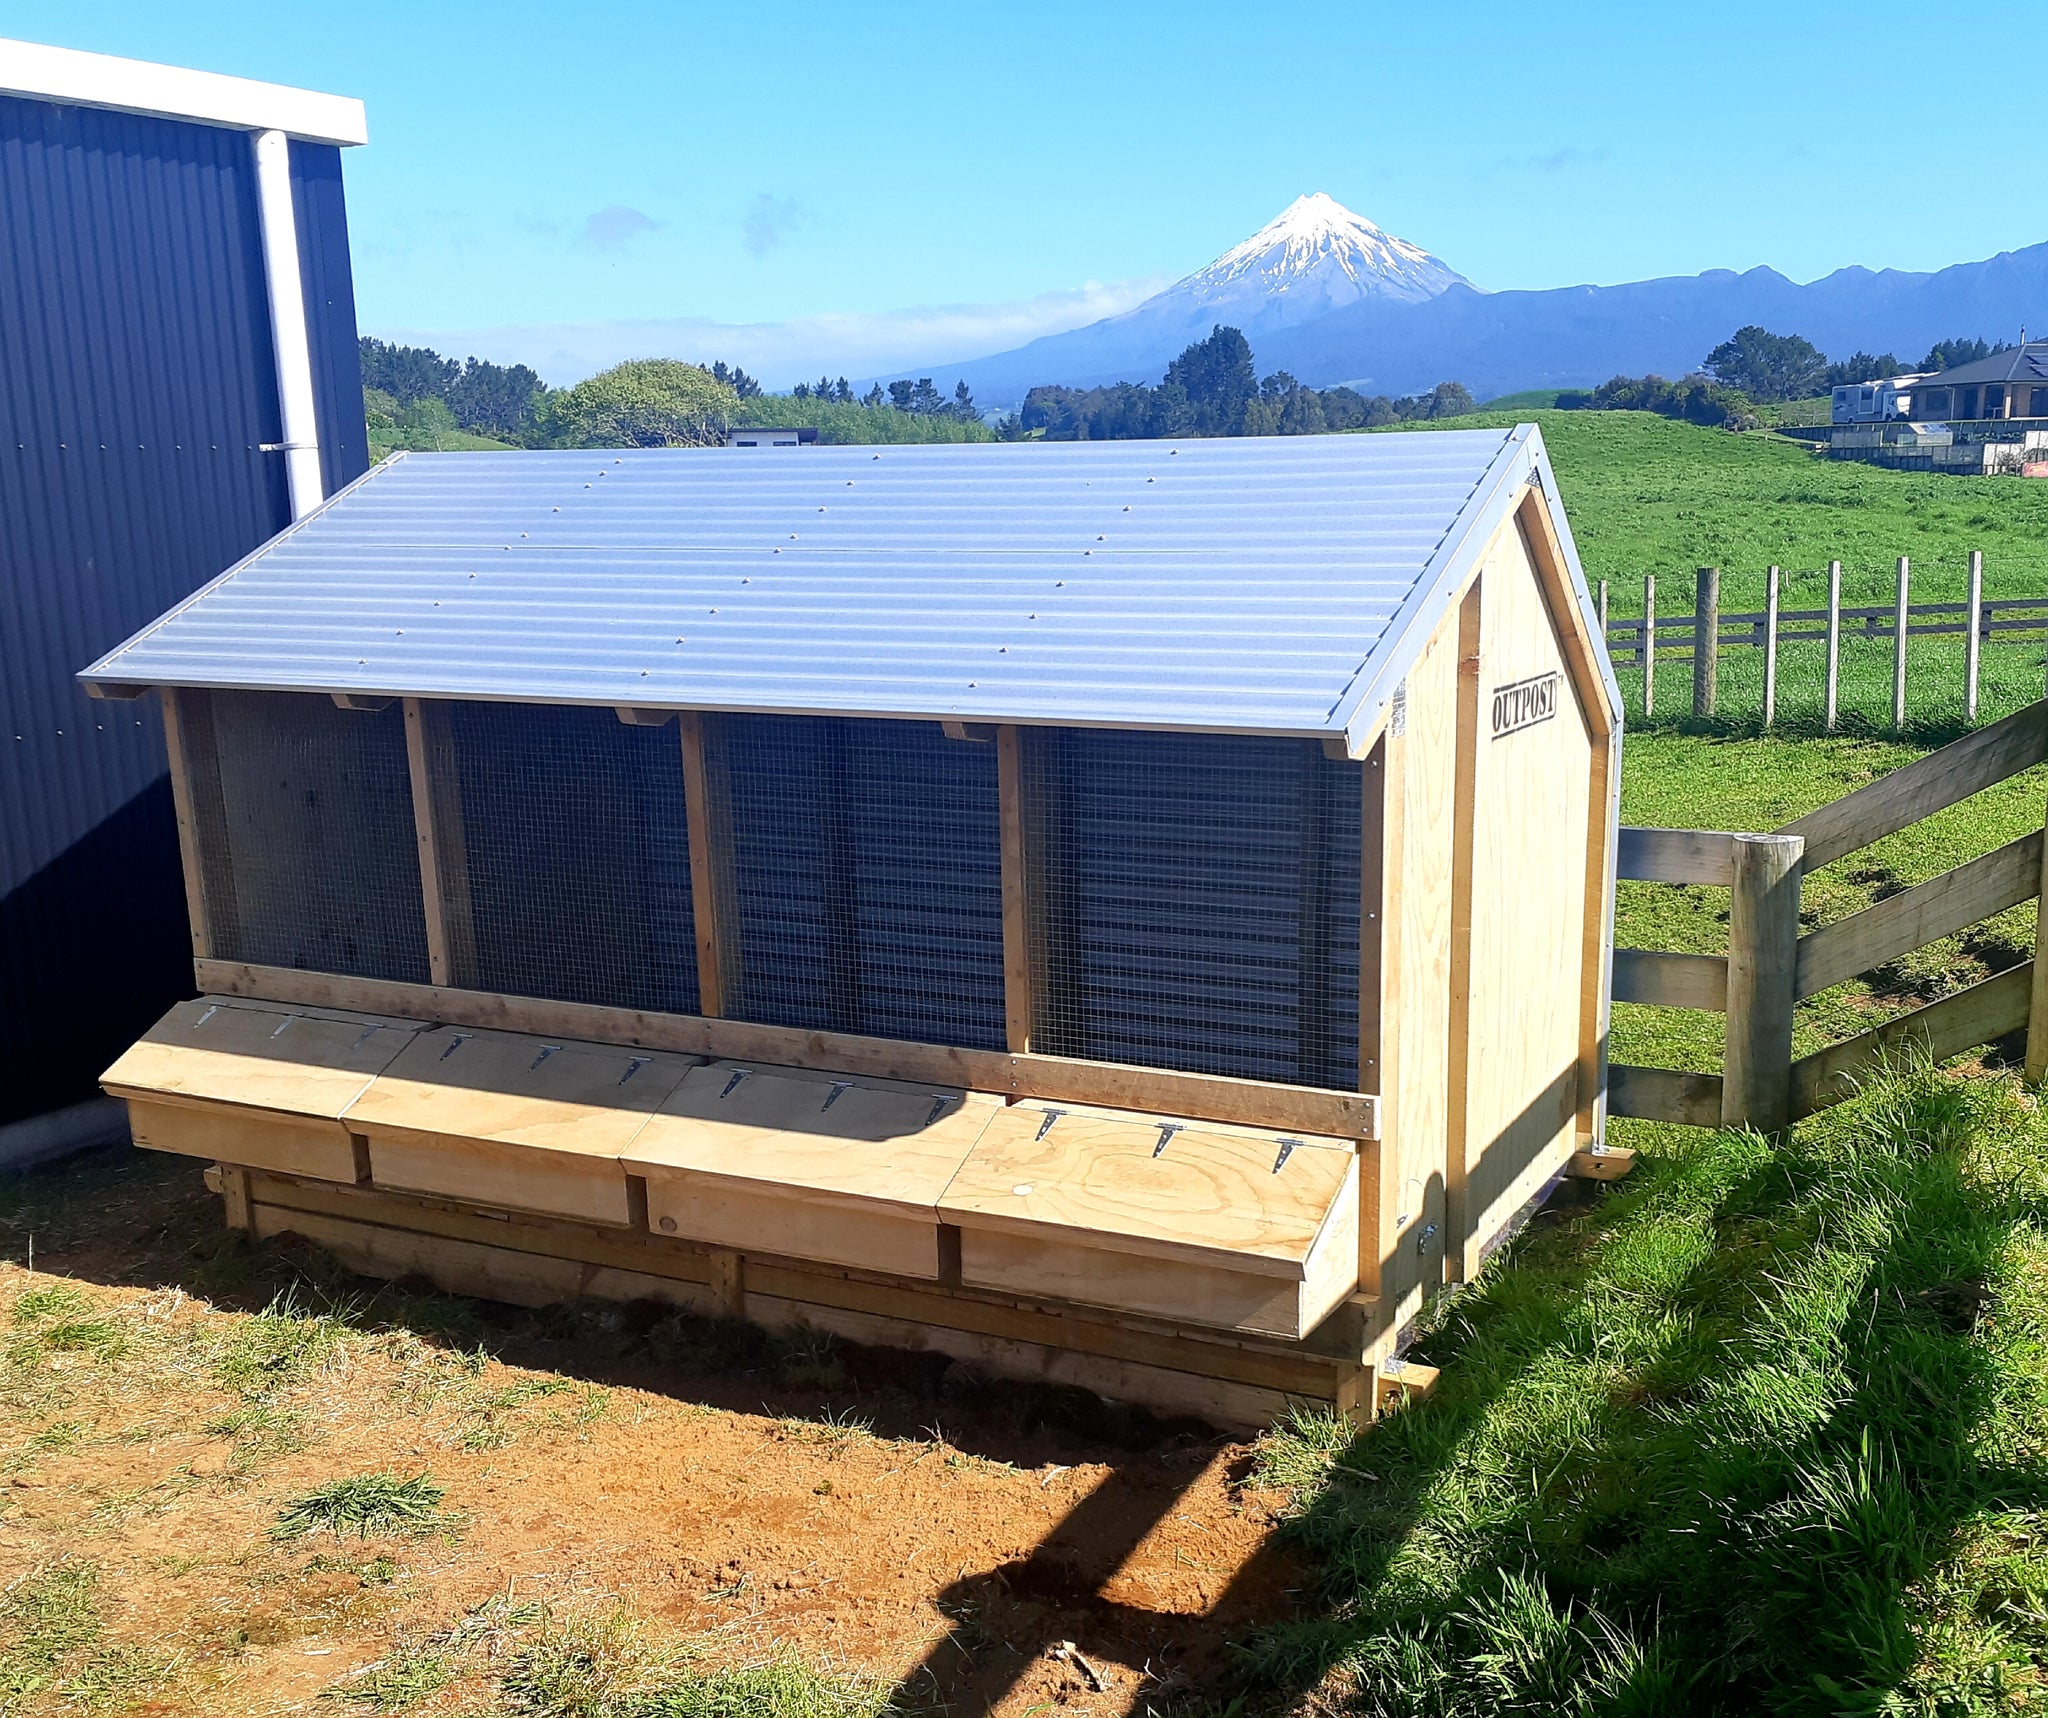 Customer story: Chicken Coops for Day Old Chicks